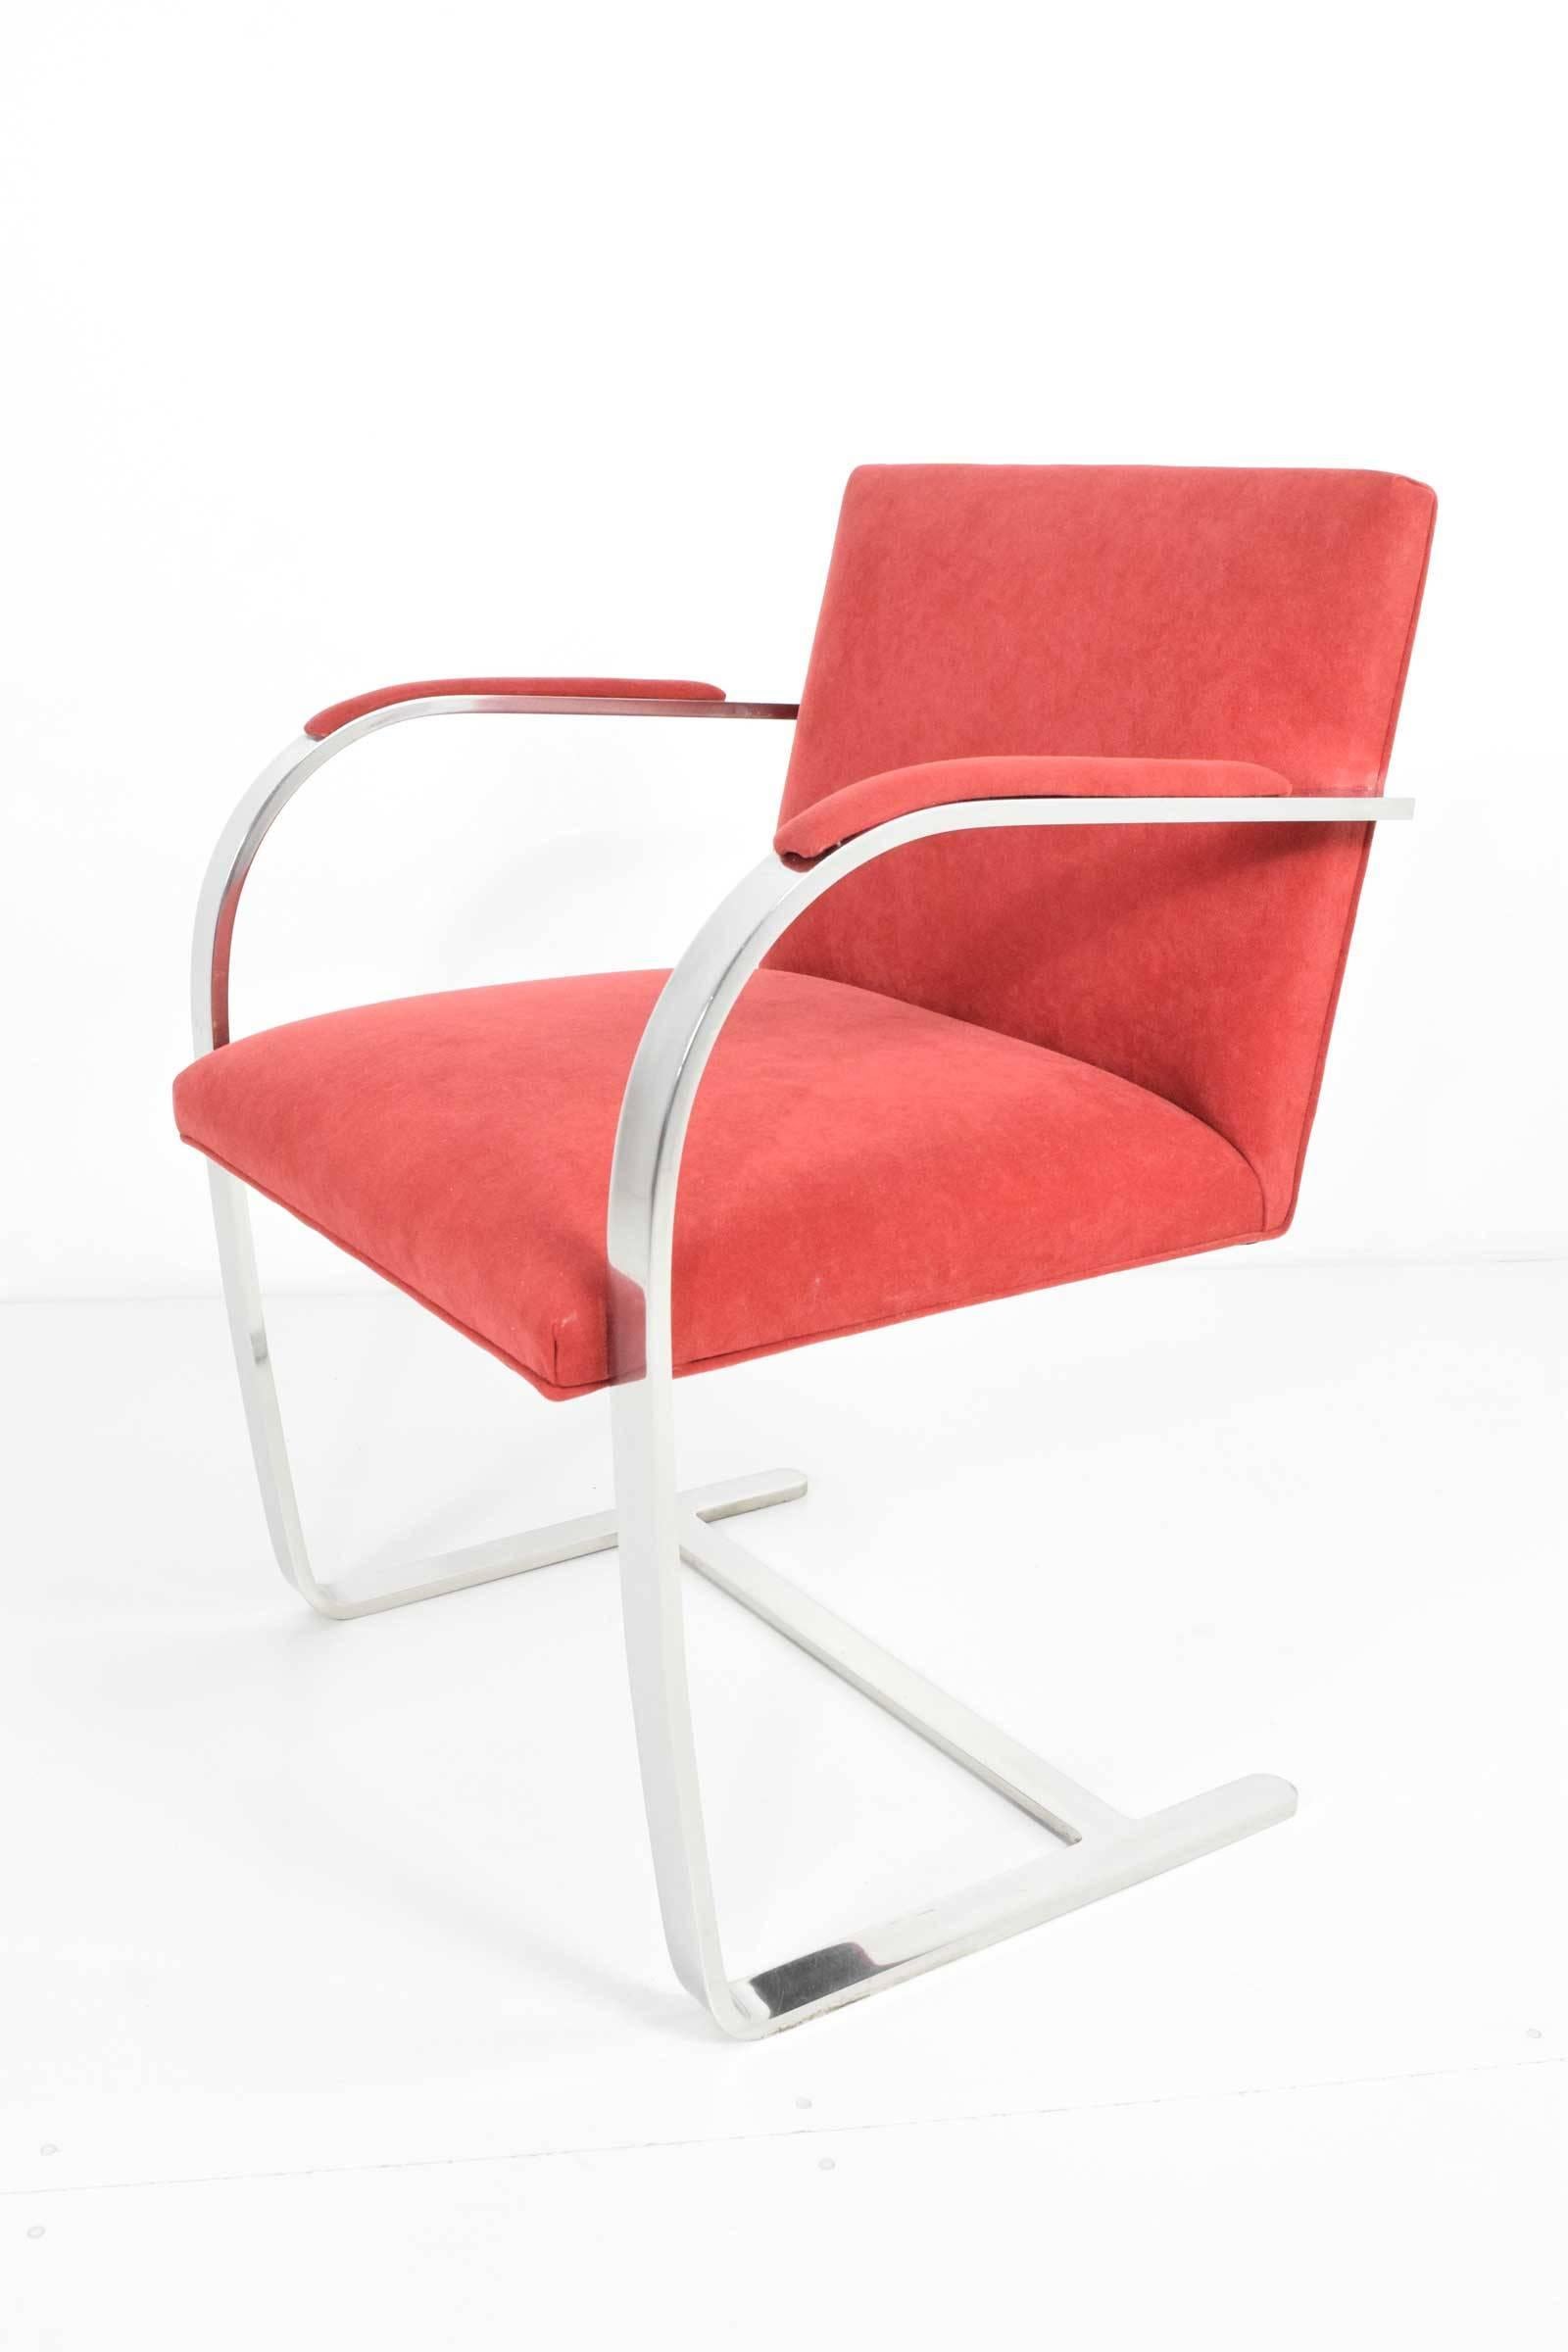 20th Century Faltbar Stainless Steel Brno Chairs by Knoll